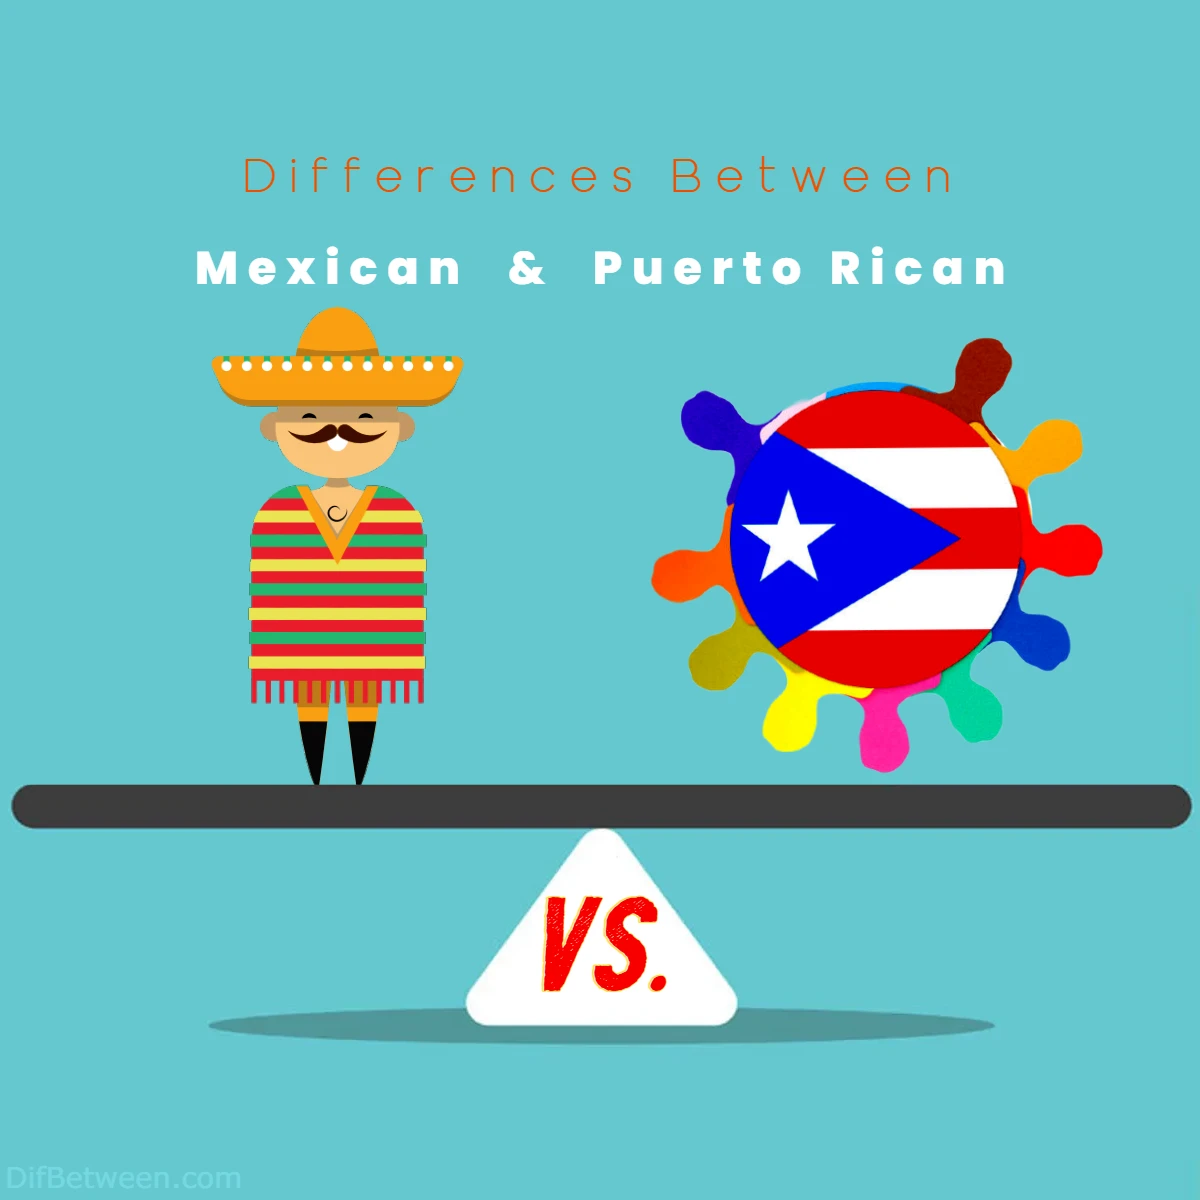 Differences Between Mexican vs Puerto Rican